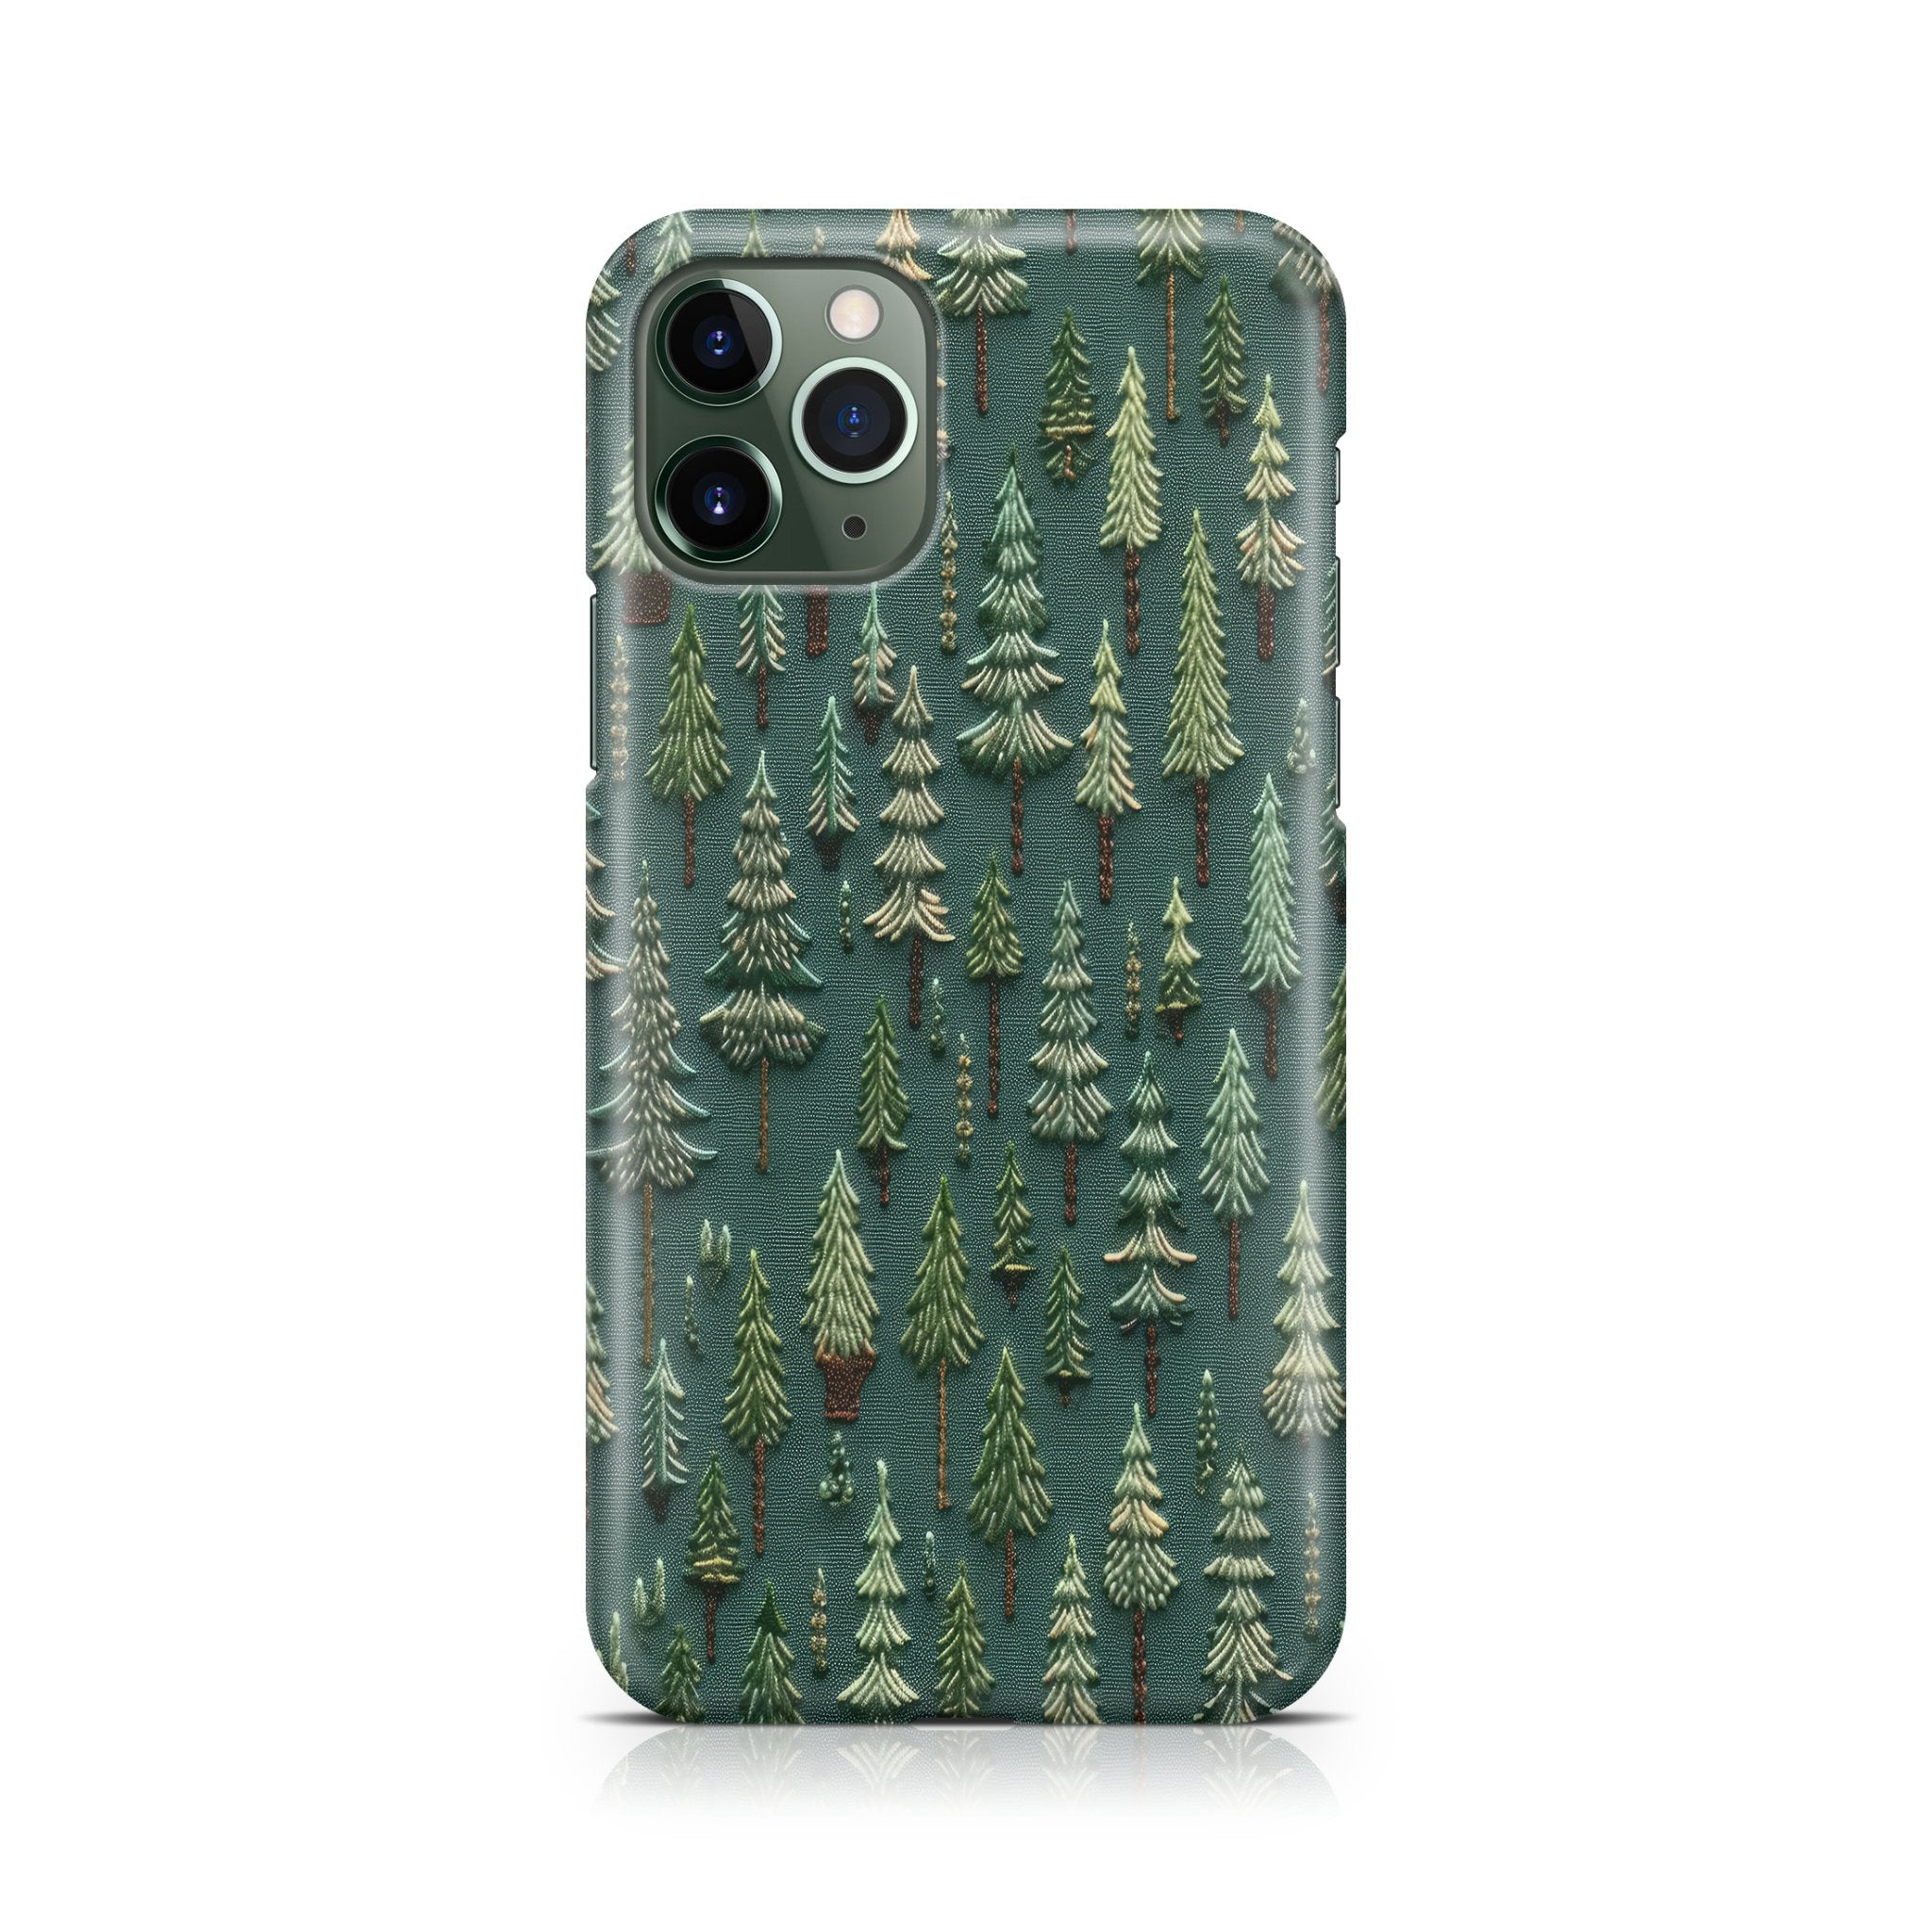 Embroidered Forest - iPhone phone case designs by CaseSwagger